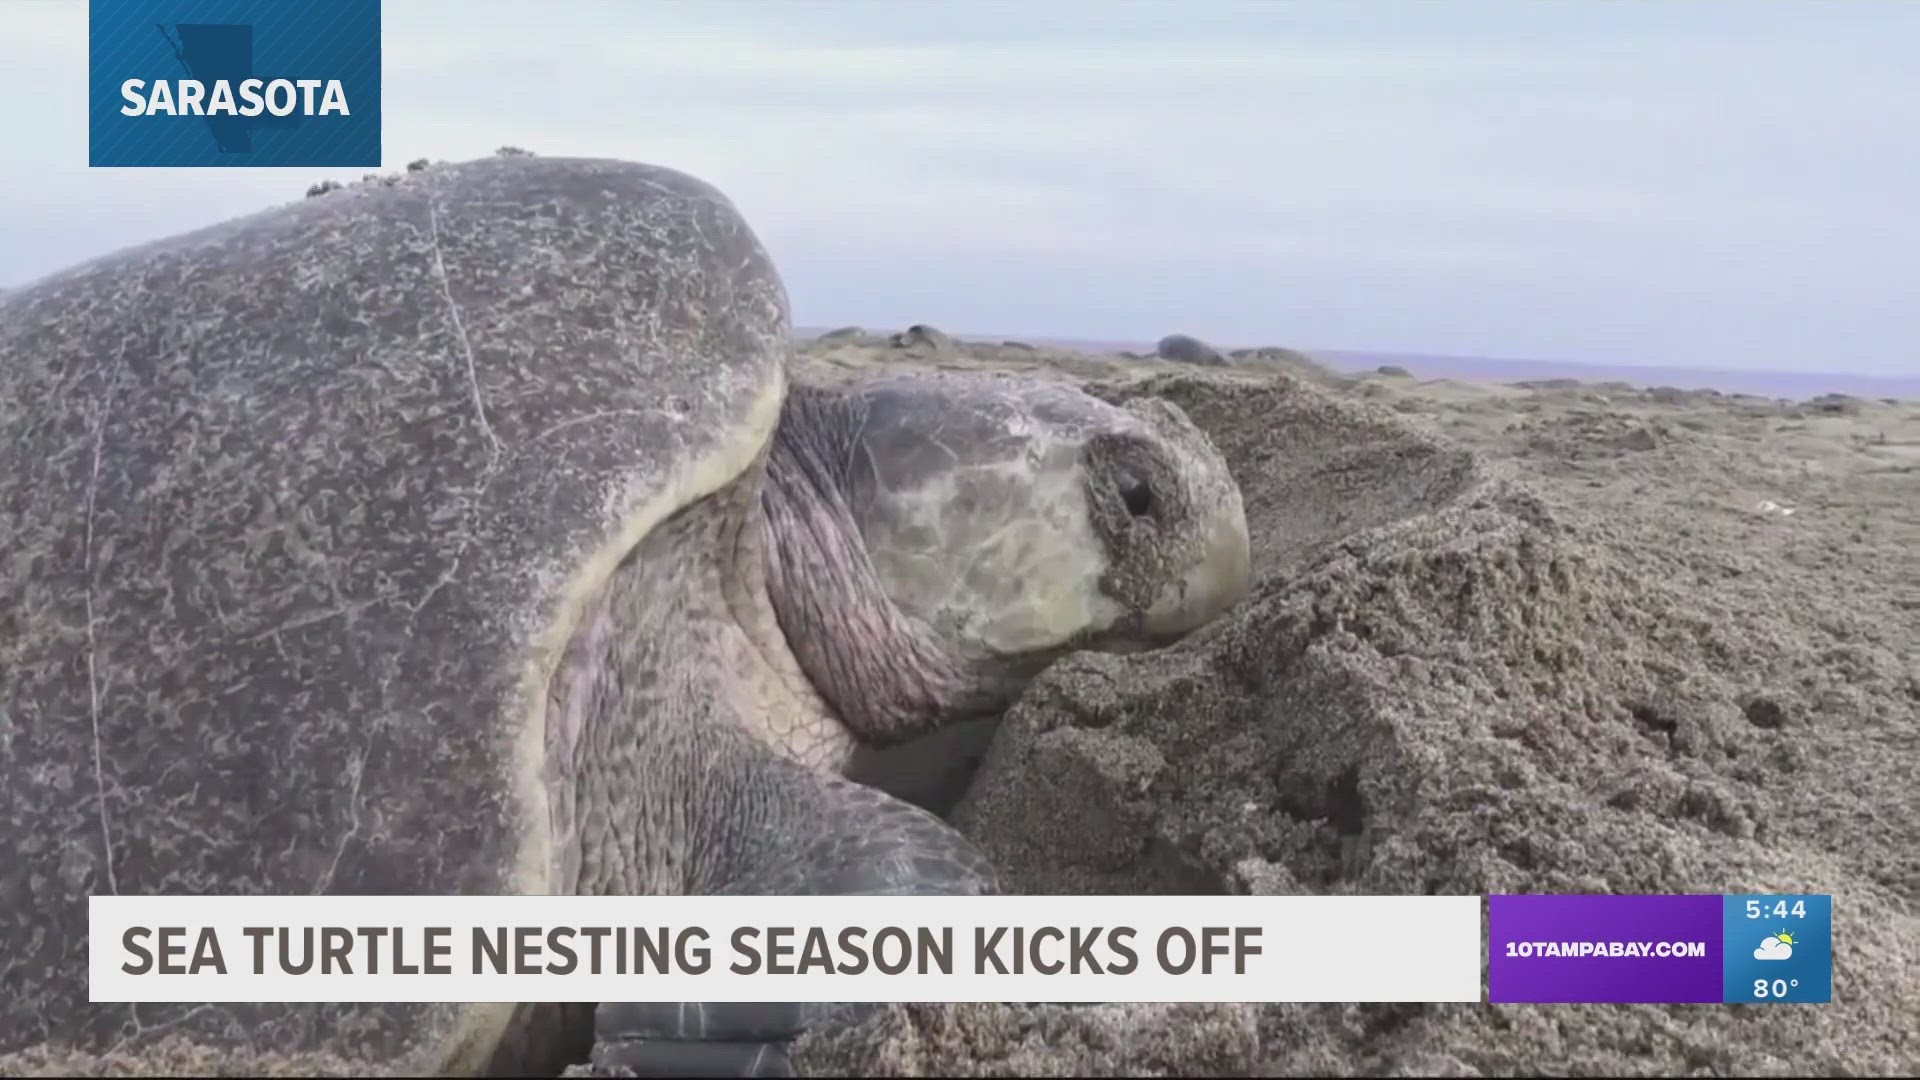 Most sea turtles are spotted nesting on Casey Key in Sarasota County, Florida.